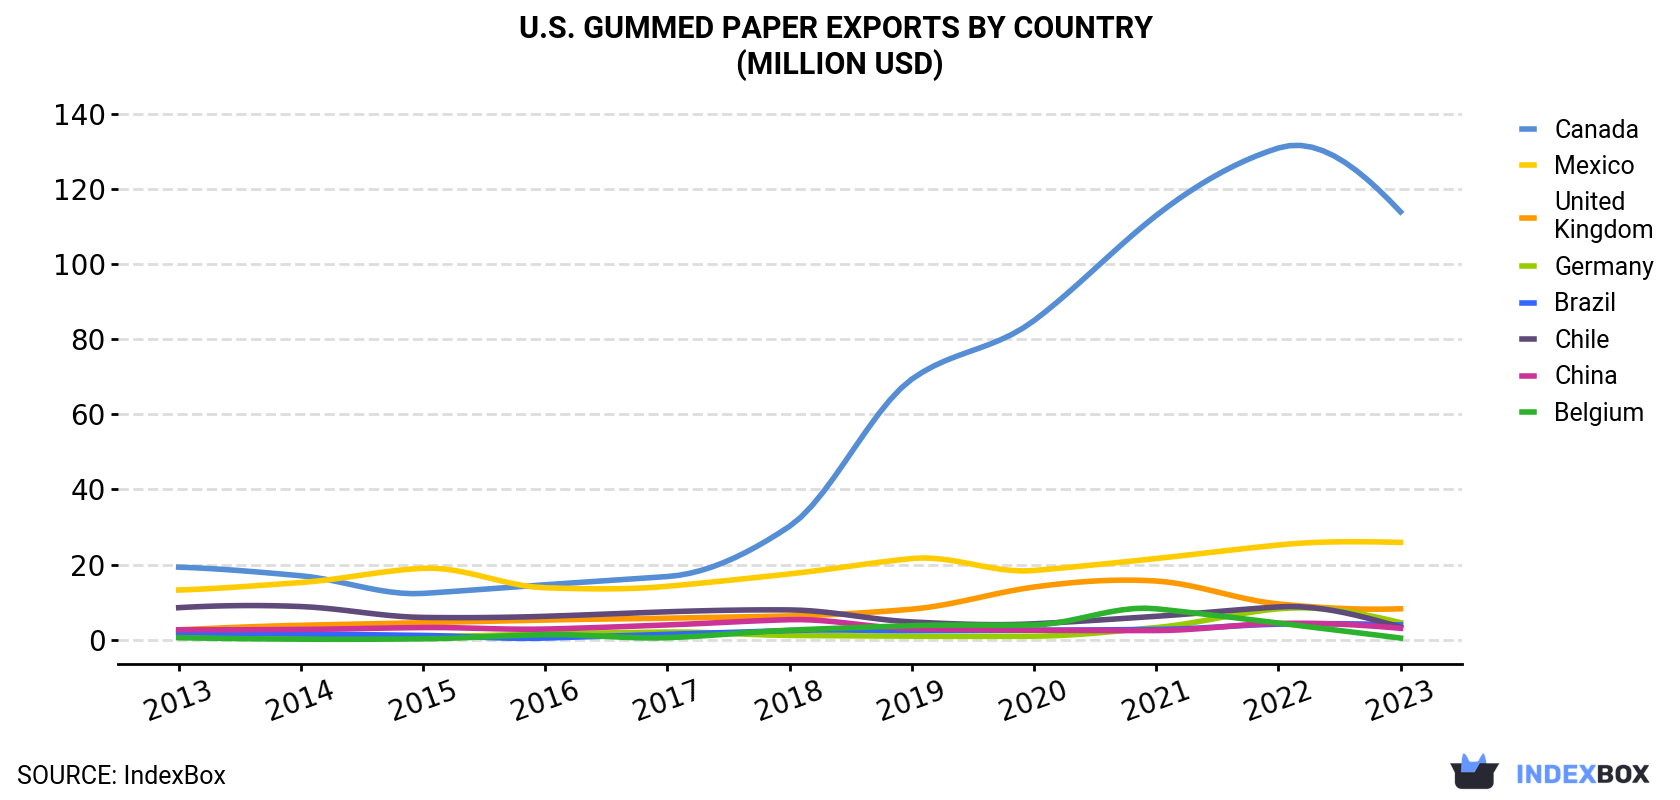 U.S. Gummed Paper Exports By Country (Million USD)